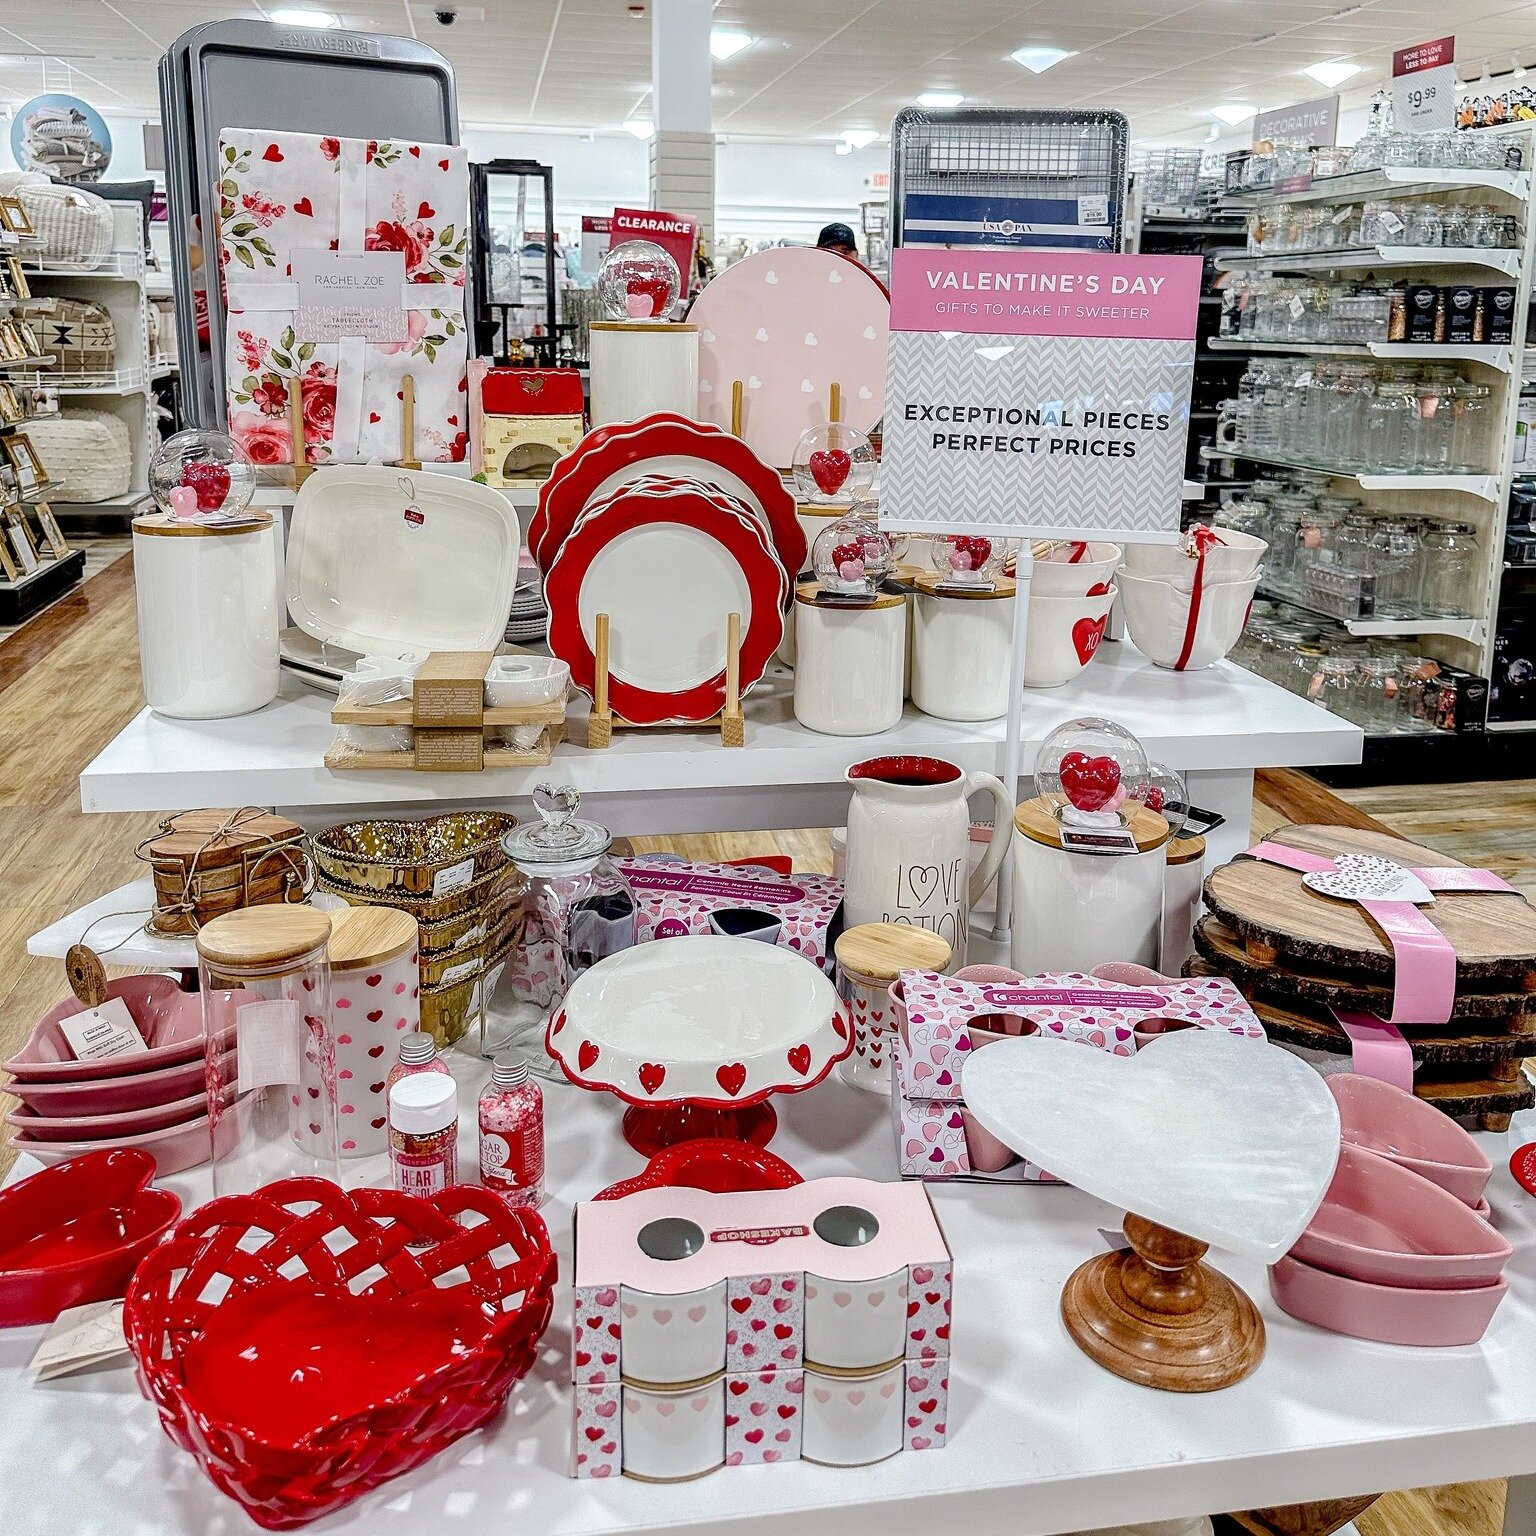 Fall in love with gorgeous cooking and serving ware at Homegoods!💗

#valentinesday #homegoods #hearts #love #cooking #baking #serving #red #pink #white #greenwaystation #greenwayshopping